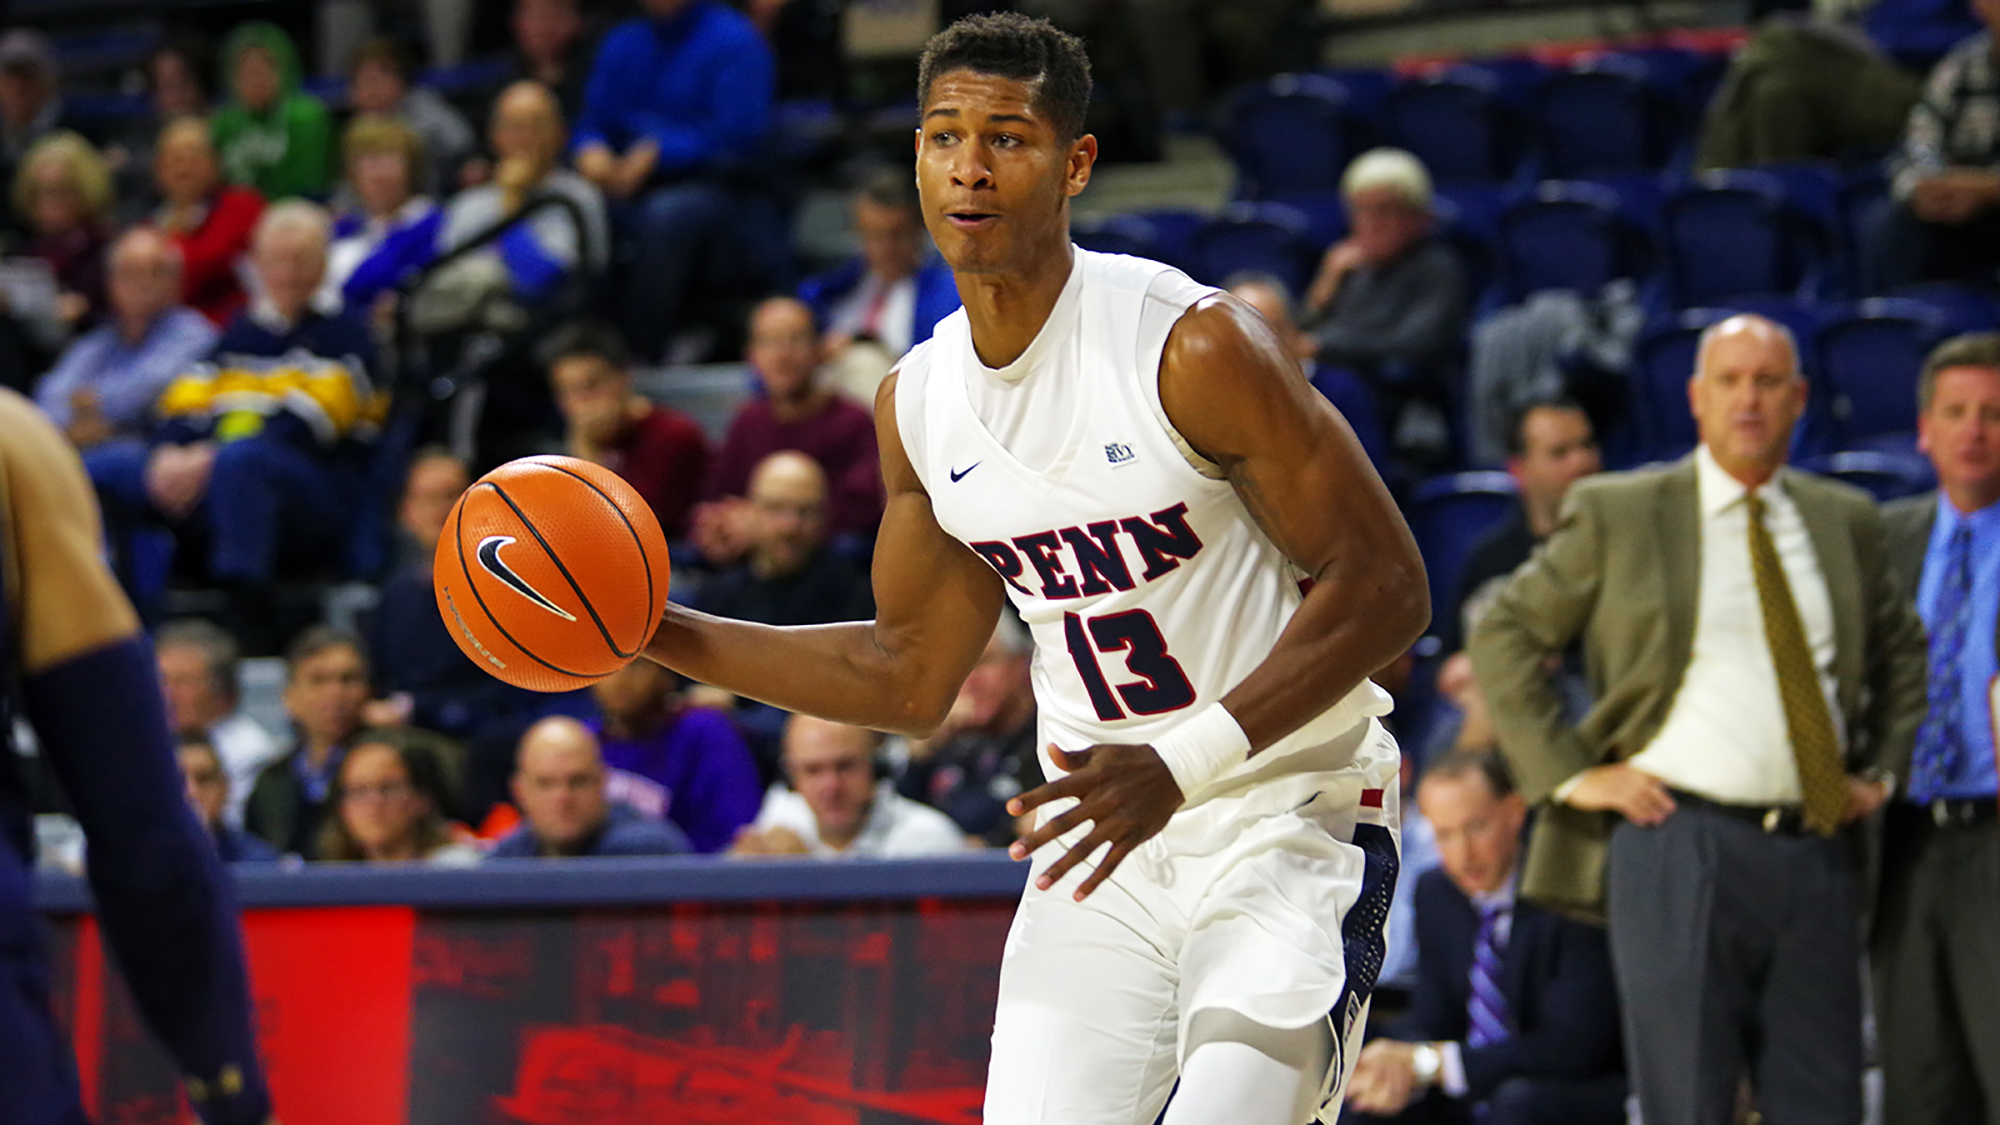 Junior guard Eddie Scott dribbles up the court at the Palestra.